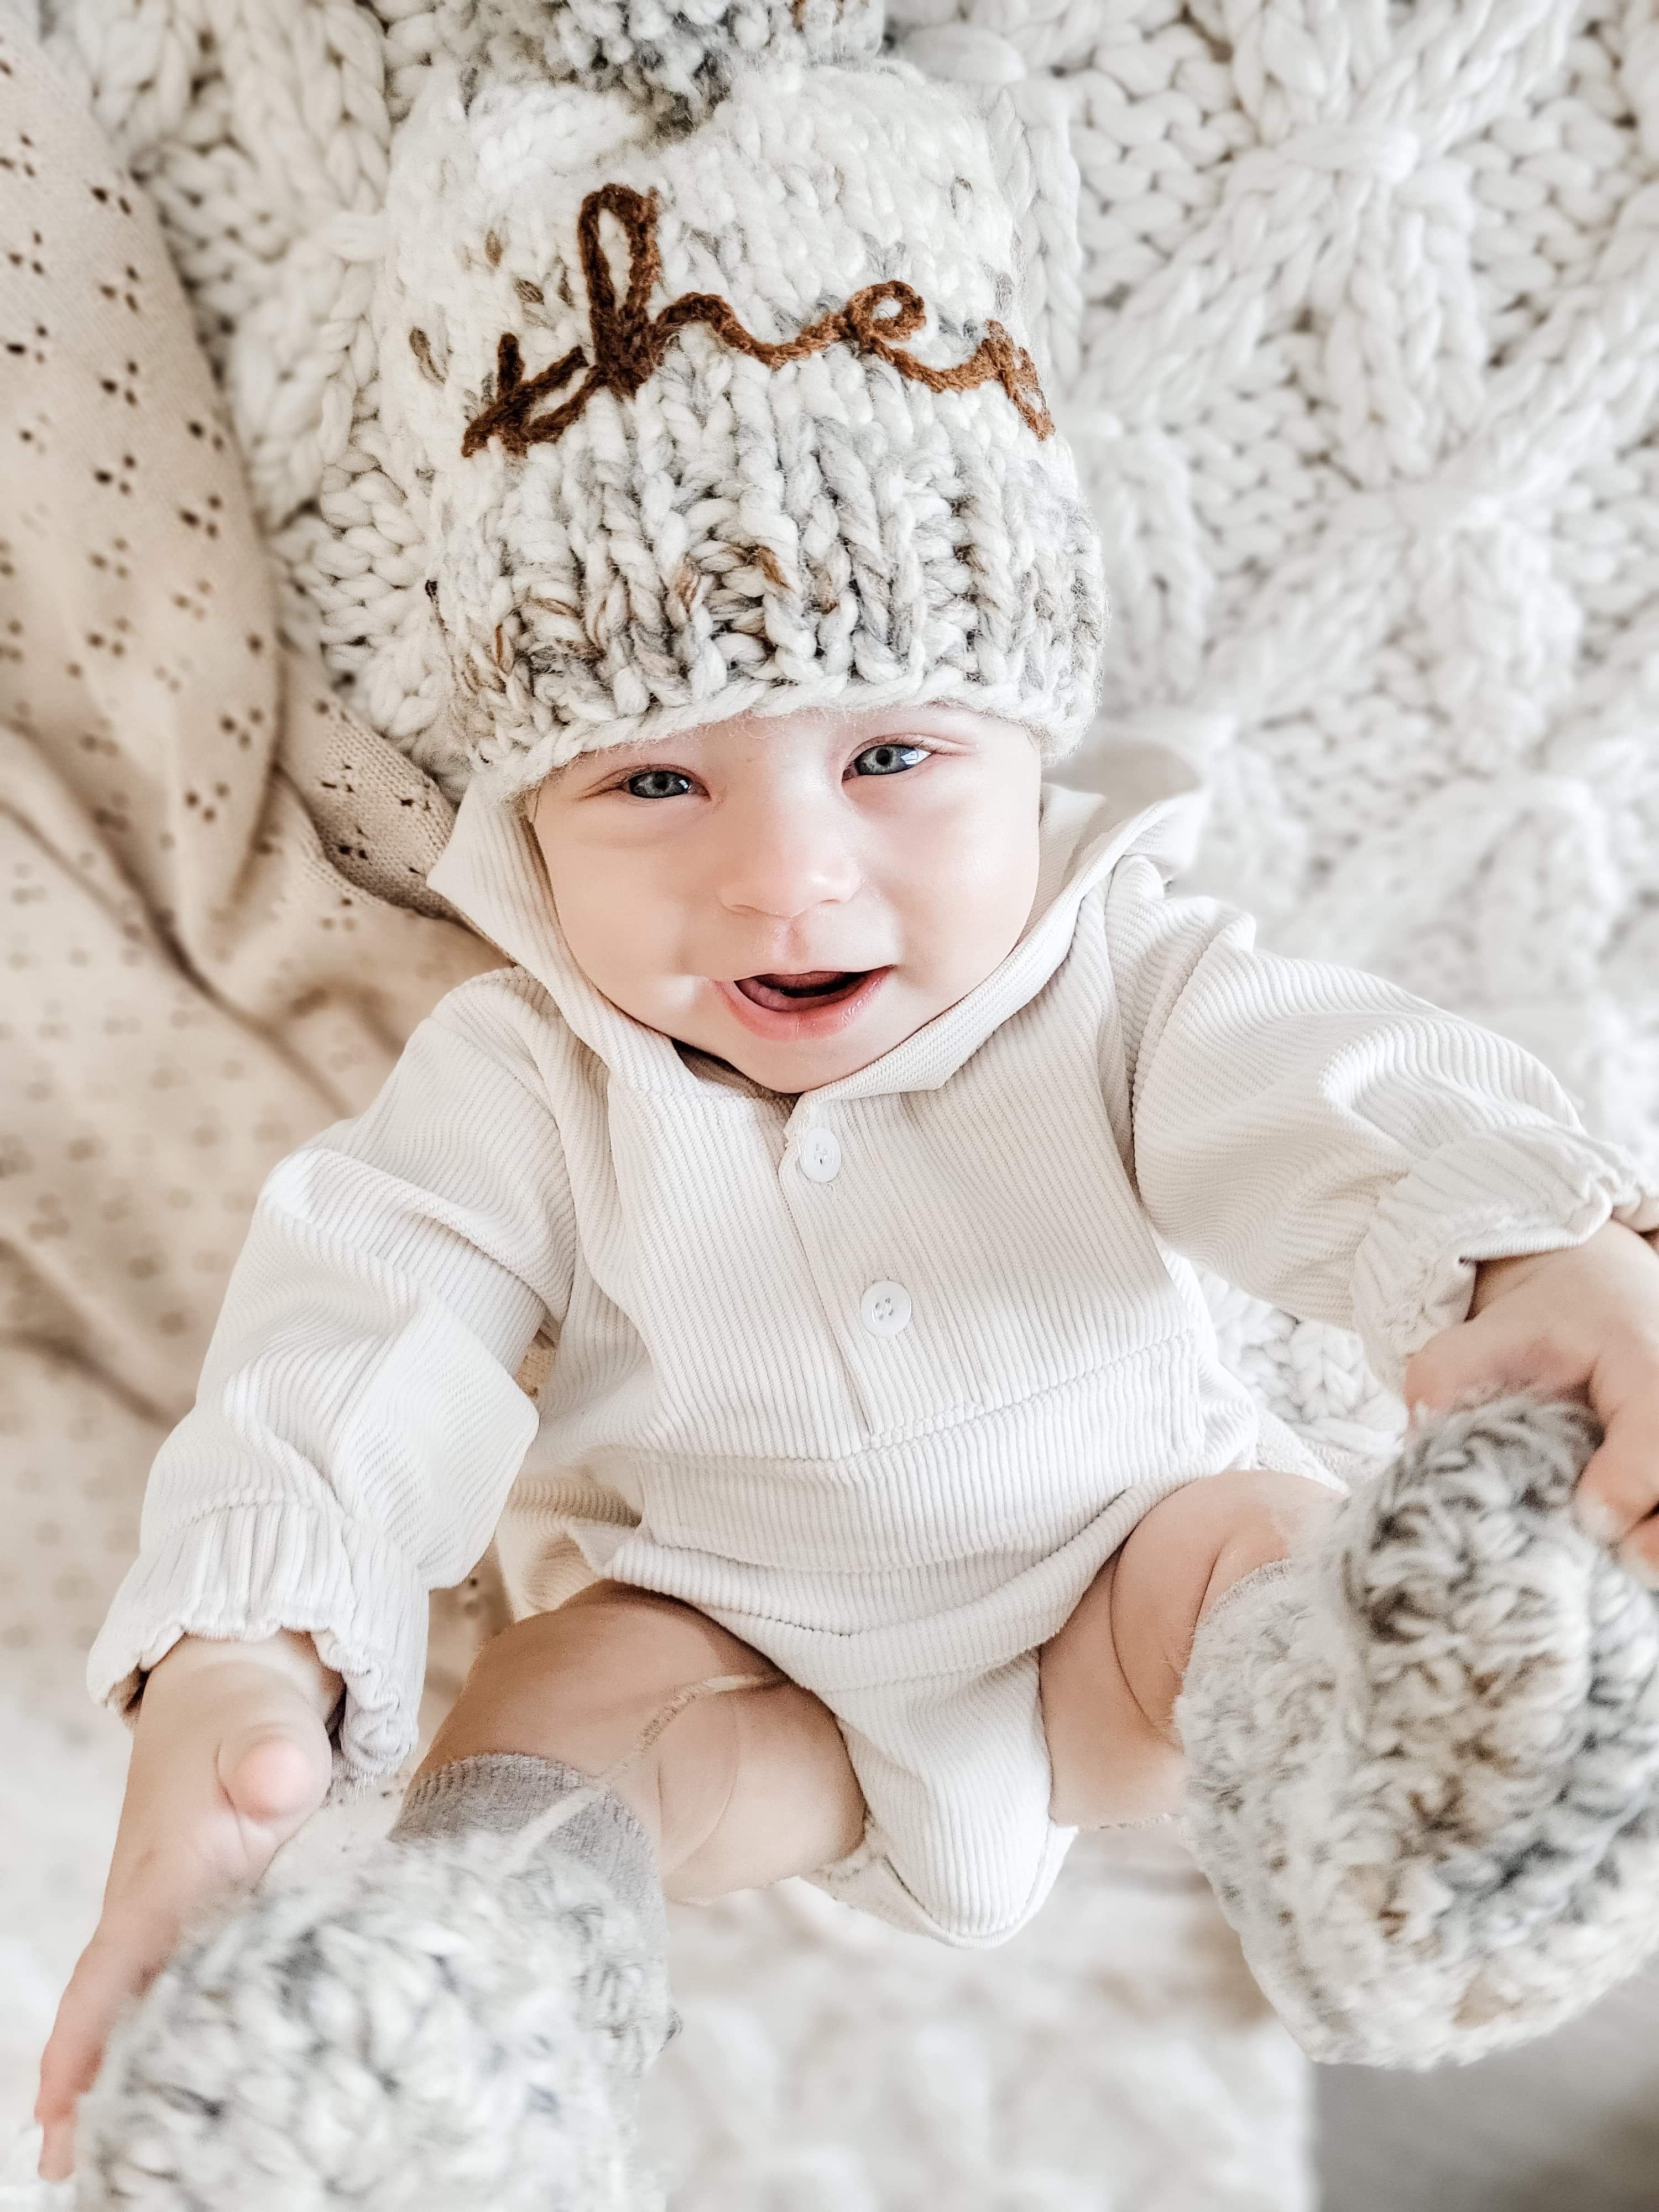 Baby wearing the Kids White Rib Hood Pocket Romper. 2 white buttons at chest, pocket with flap at stomach area, and rouged bits at the wrists. baby is also wearing a knit hat & socks.